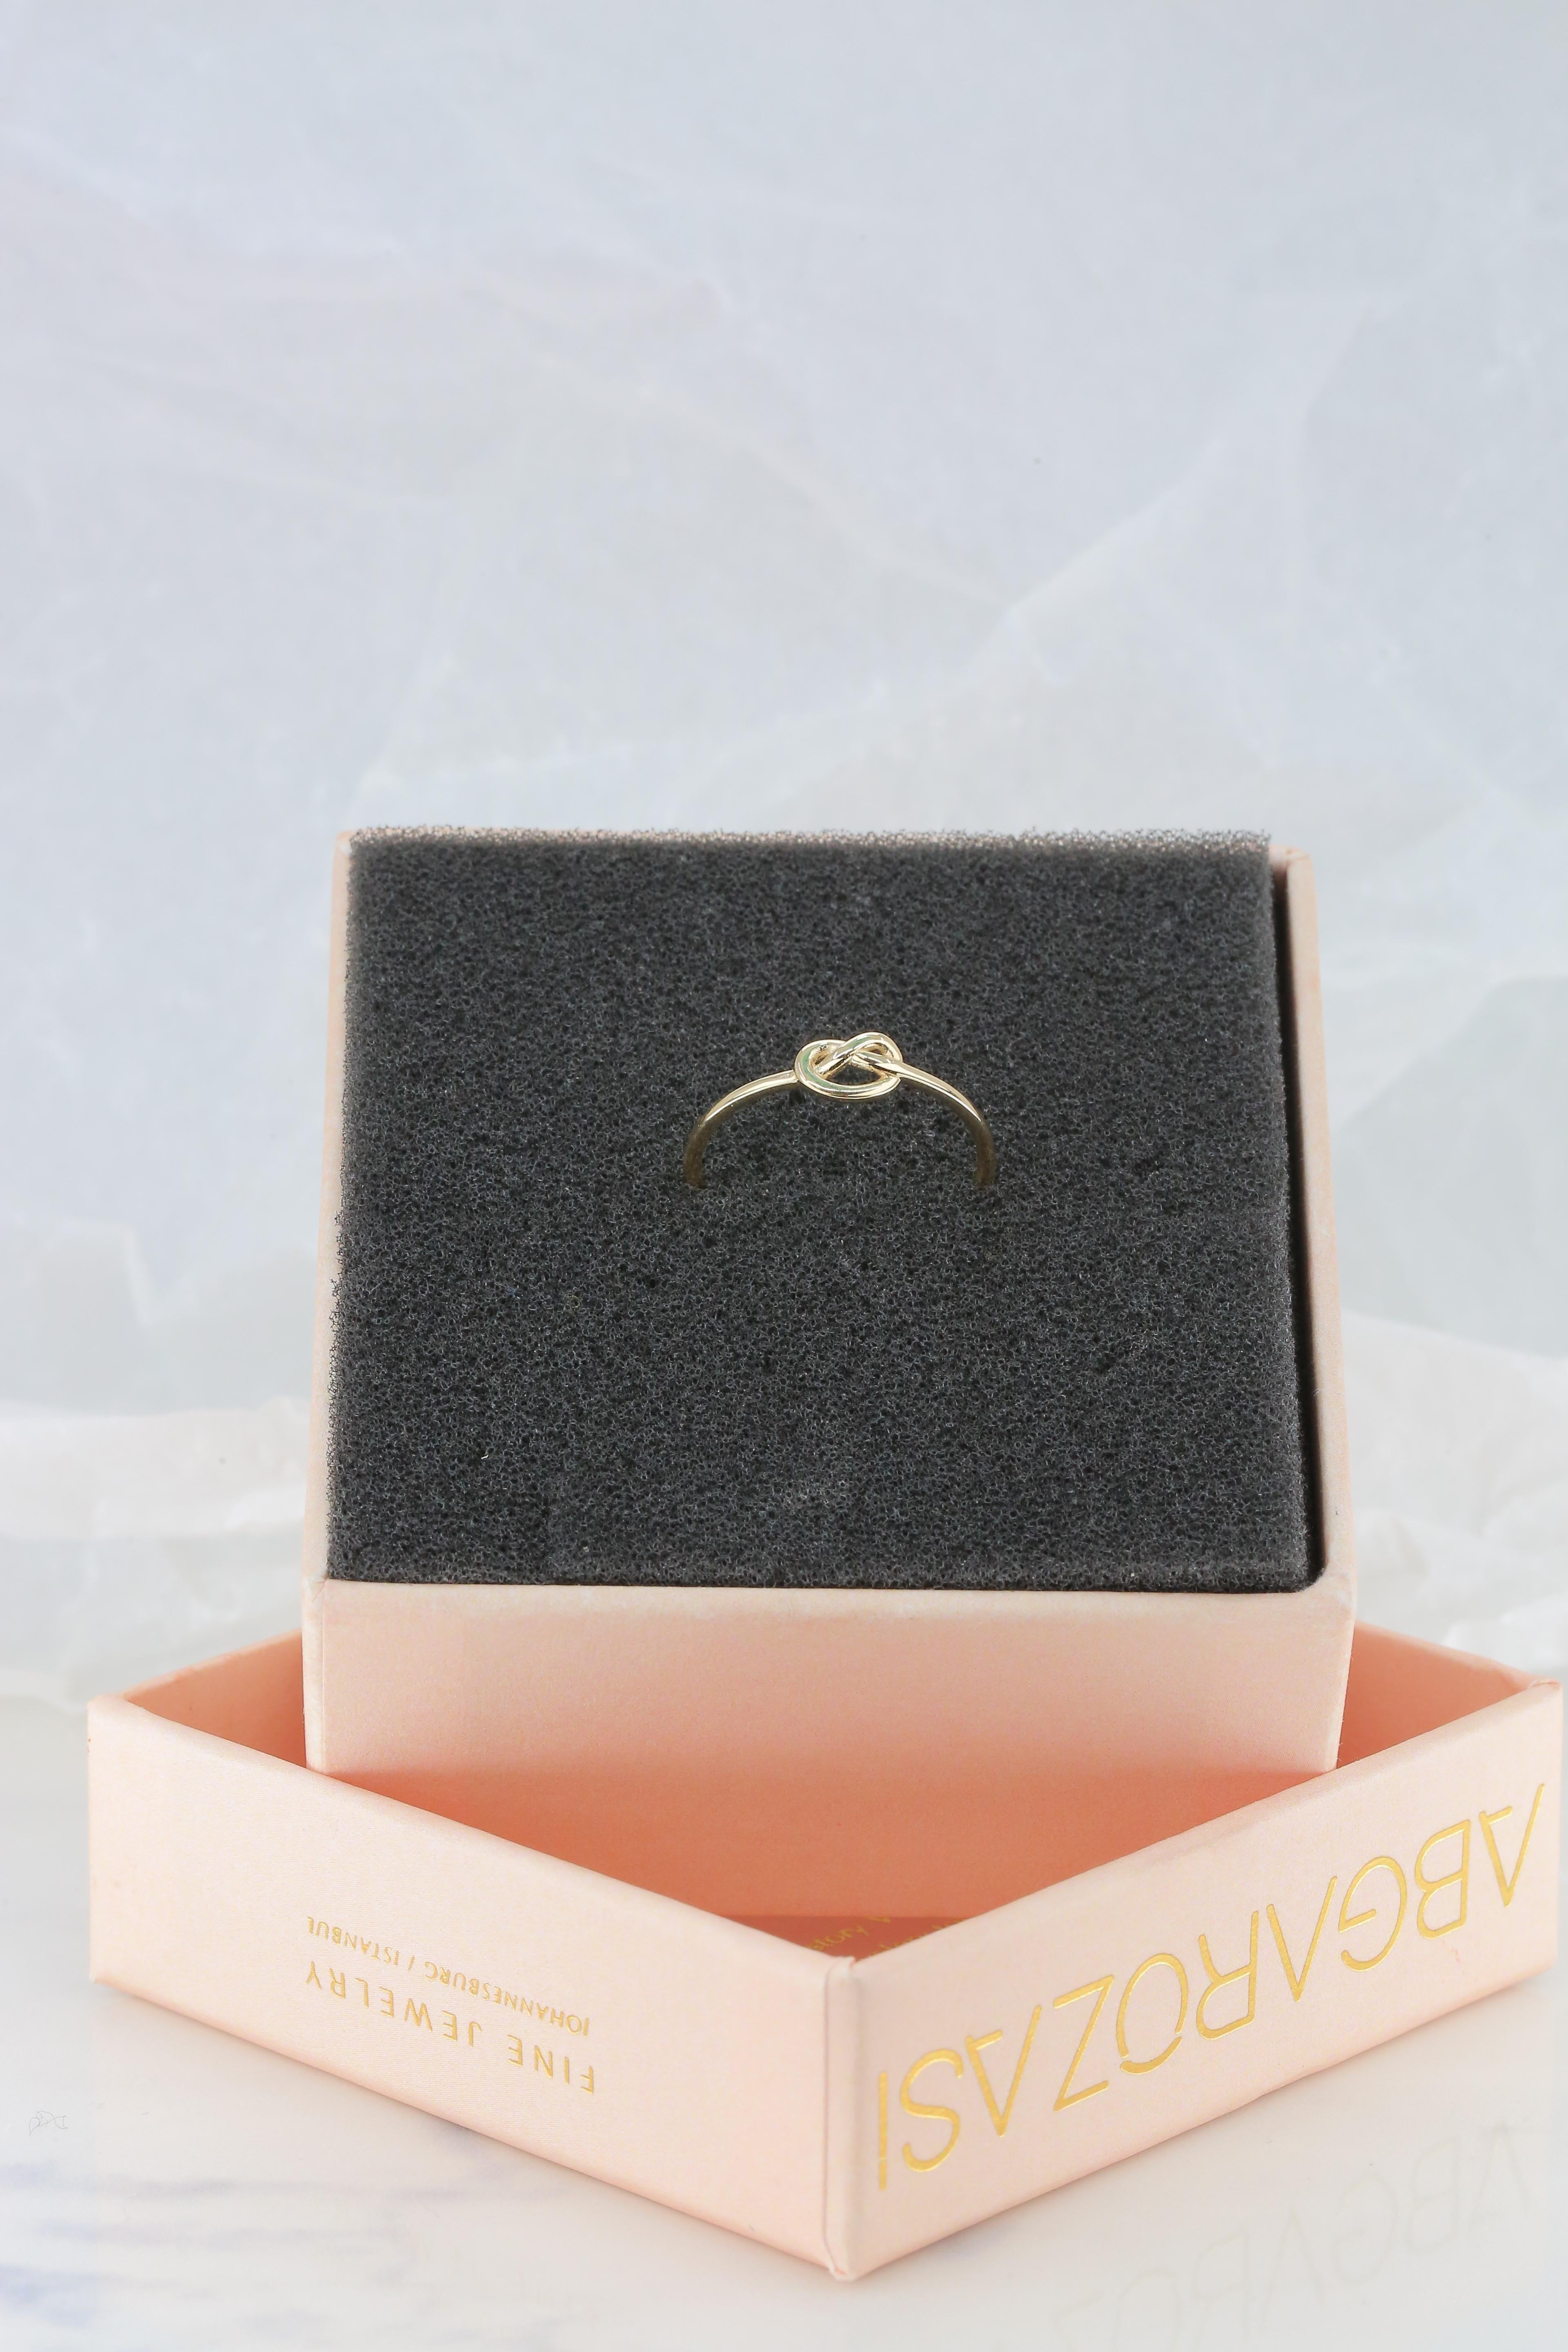 For Sale:  Gold Knot Ring, 14k Solid Gold, Dainty Ring, Minimalist Style Ring, Promise Ring 3